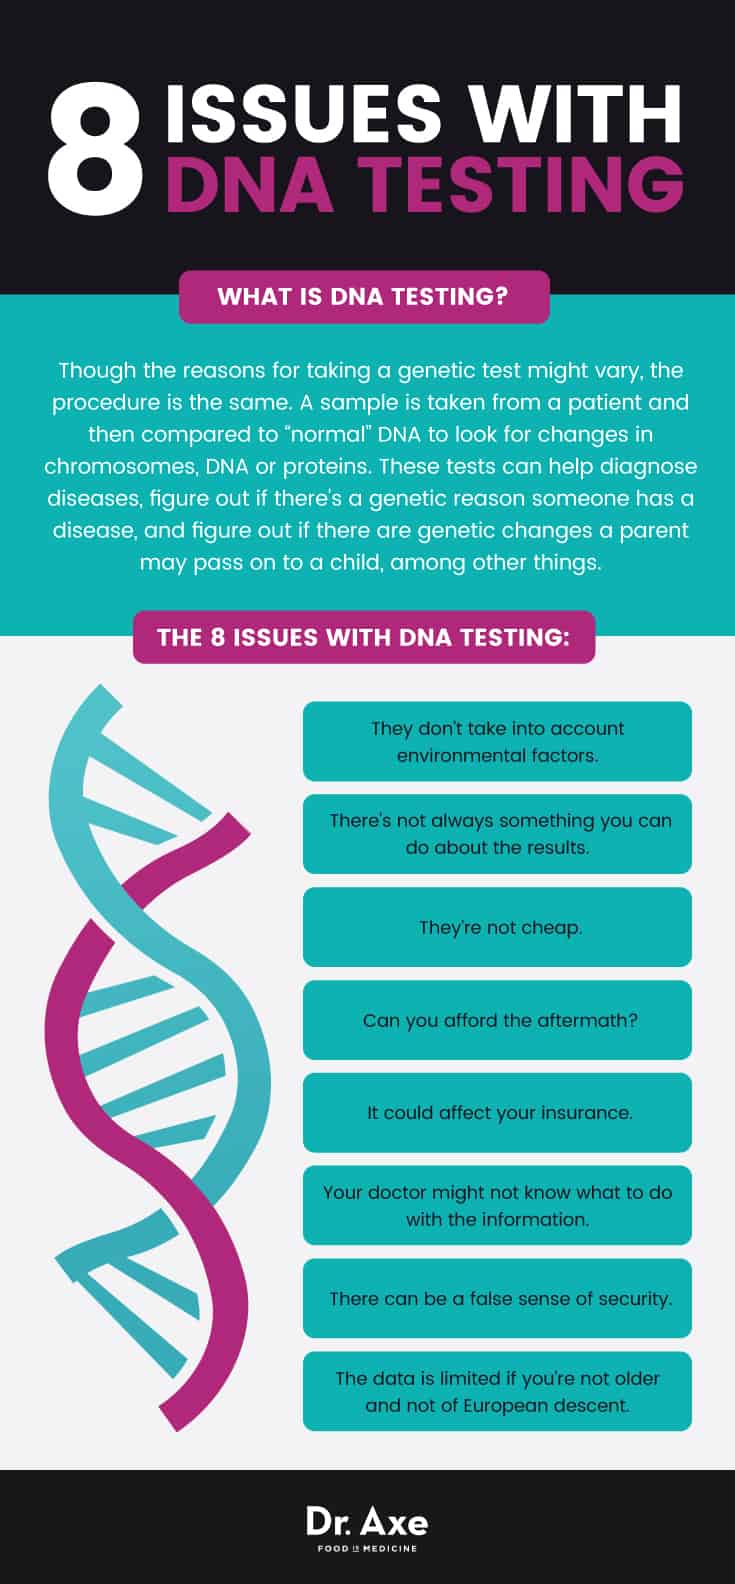 DNA testing: 8 issues - Dr. Axe